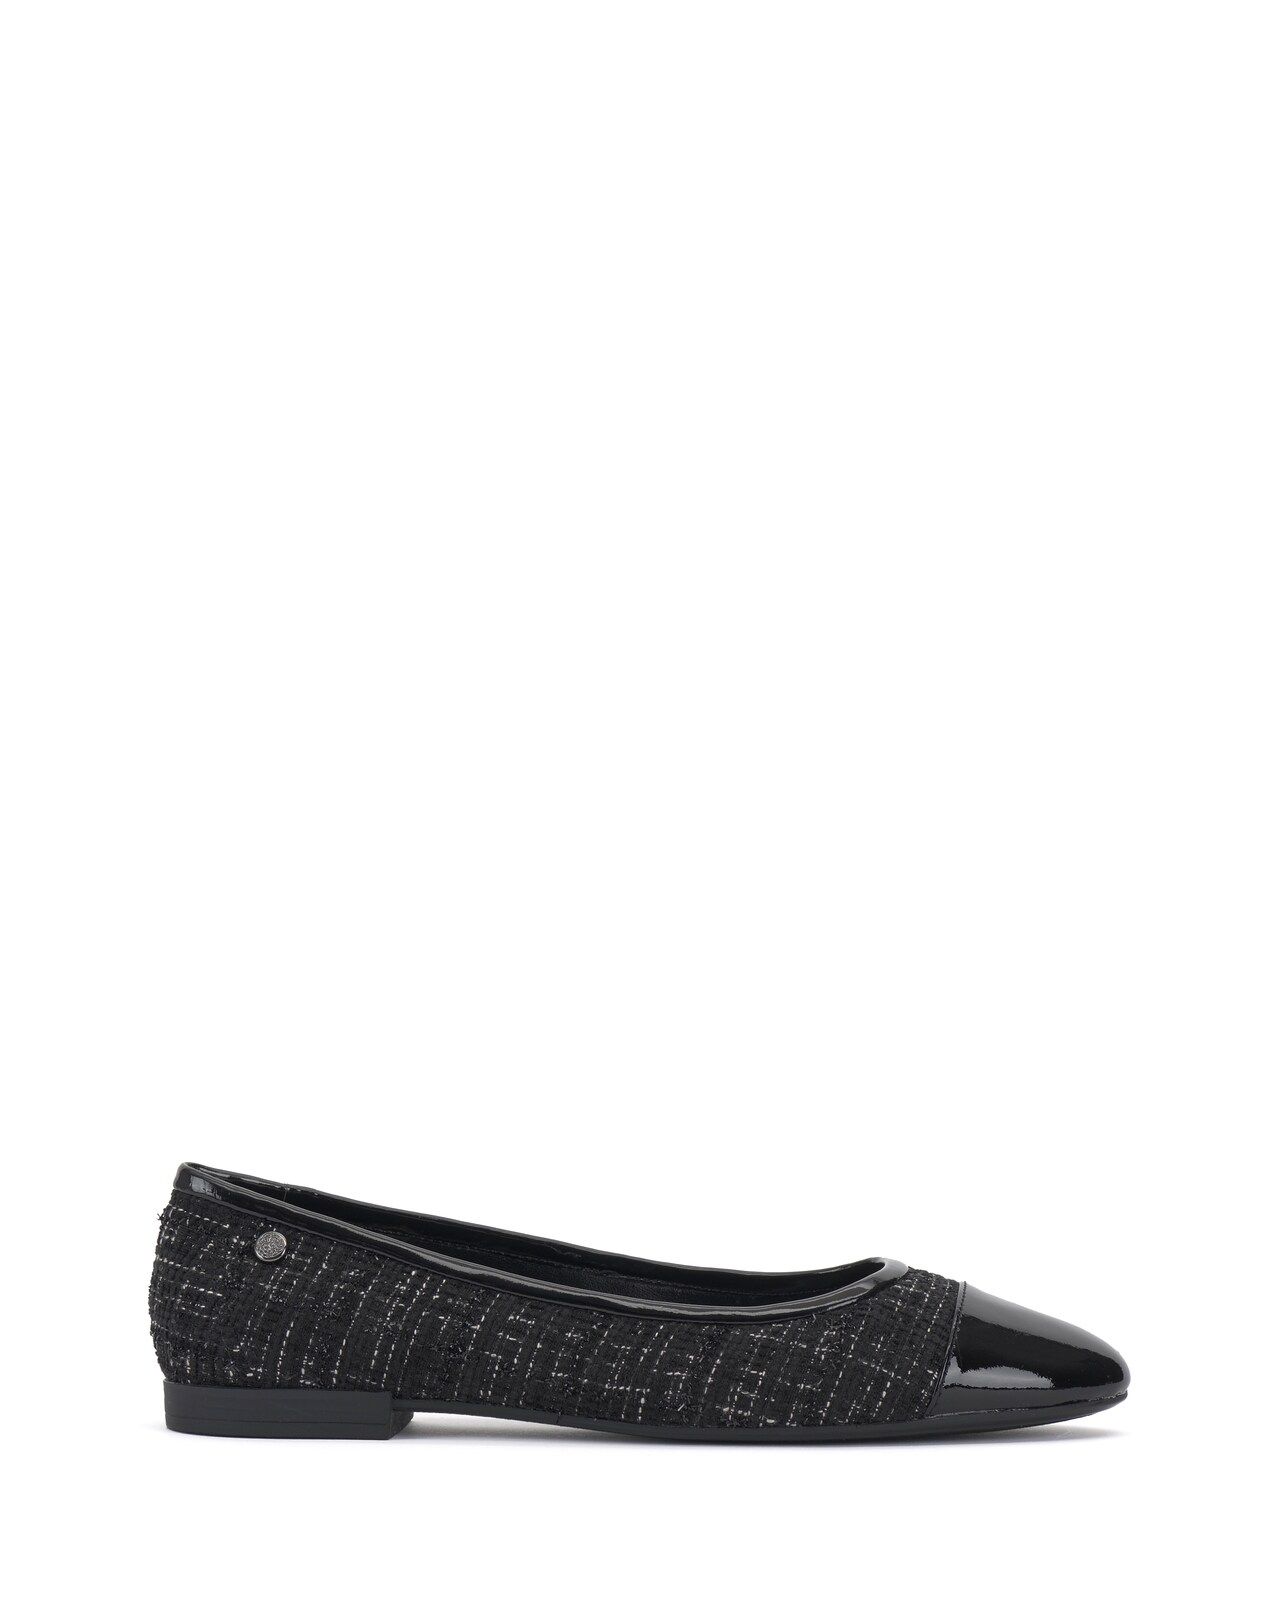 Vince Camuto Minndy Cap Toe Ballet Flat | Vince Camuto